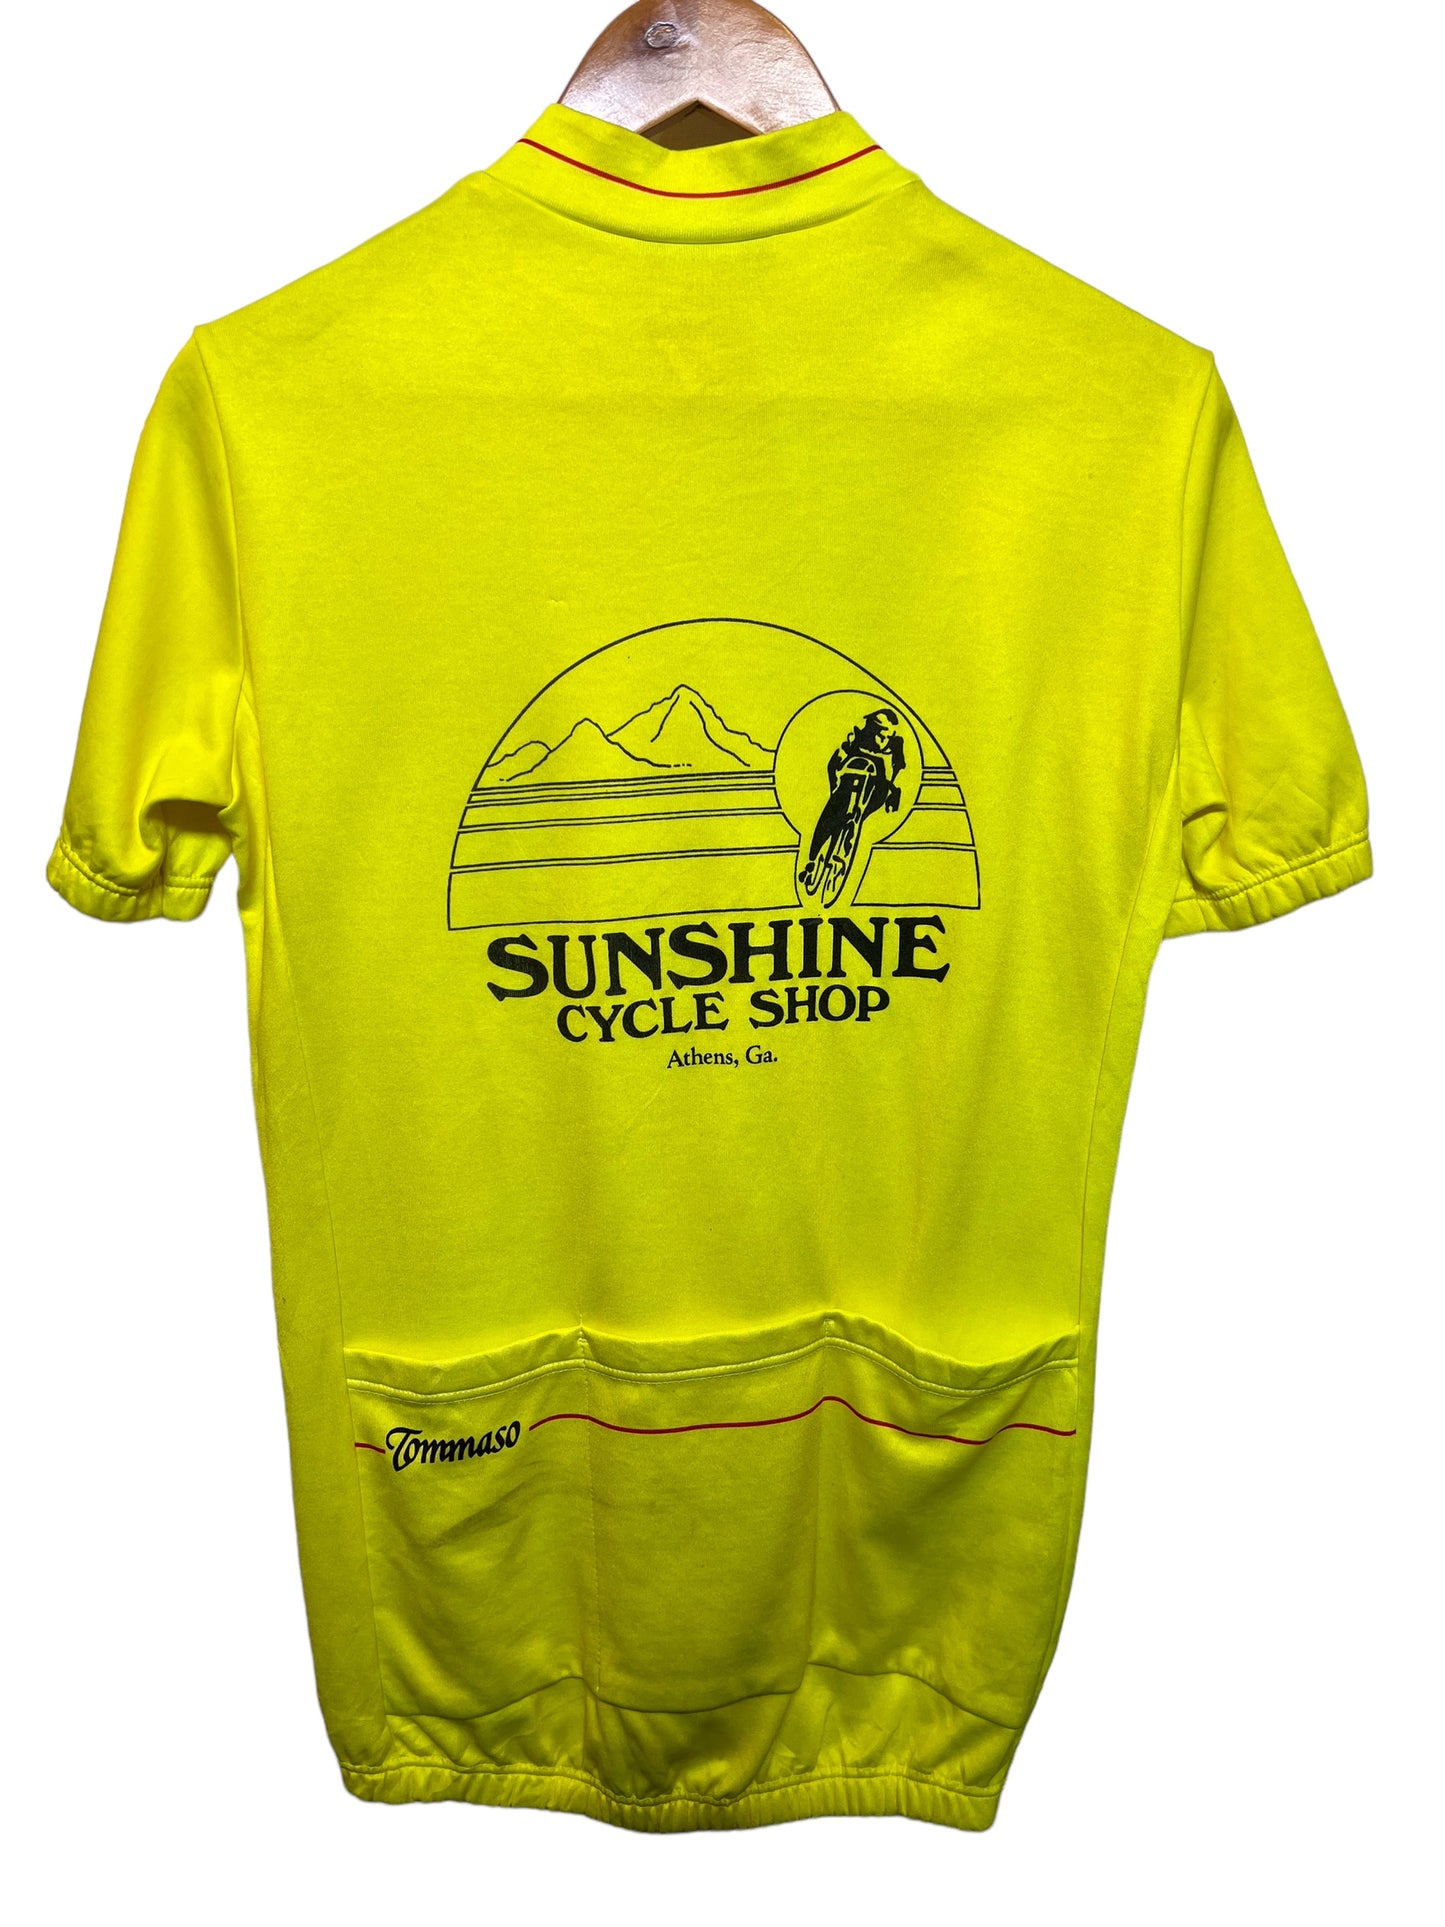 Men’s Yellow Cycling Jersey (Size S)